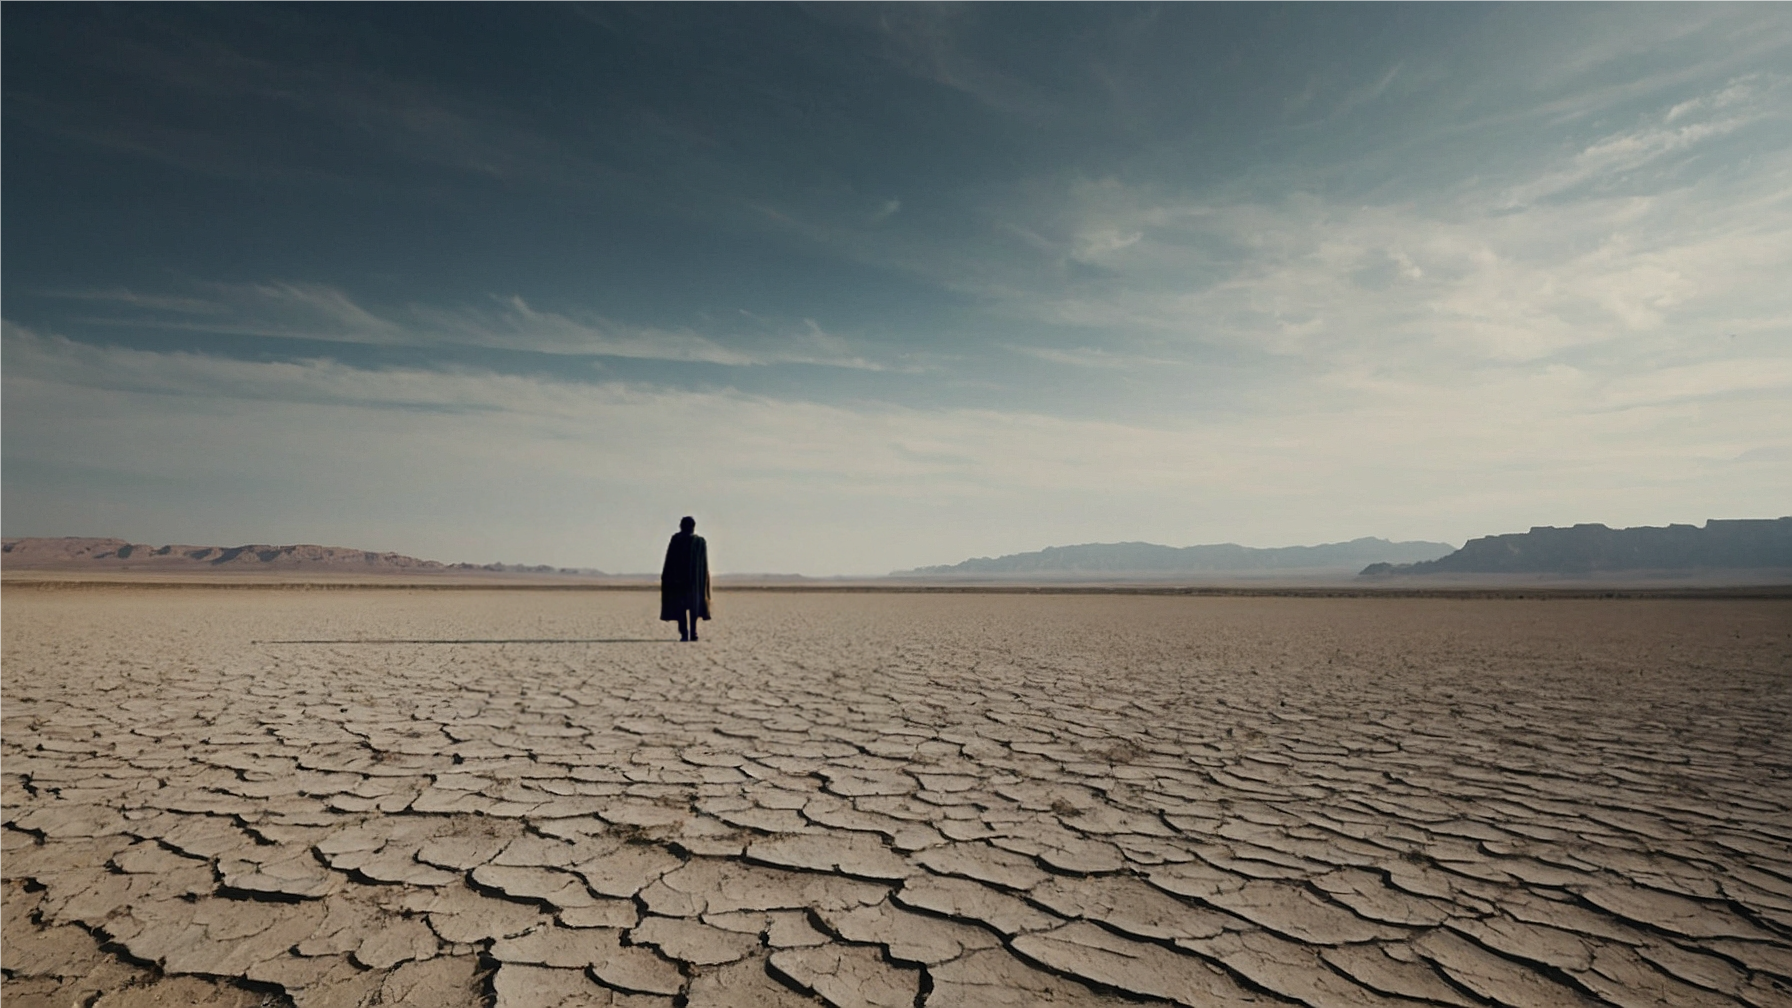 A solitary figure stands in a vast, barren landscape with cracked earth underfoot and mountains in the far distance, symbolizing resilience amidst desolation.